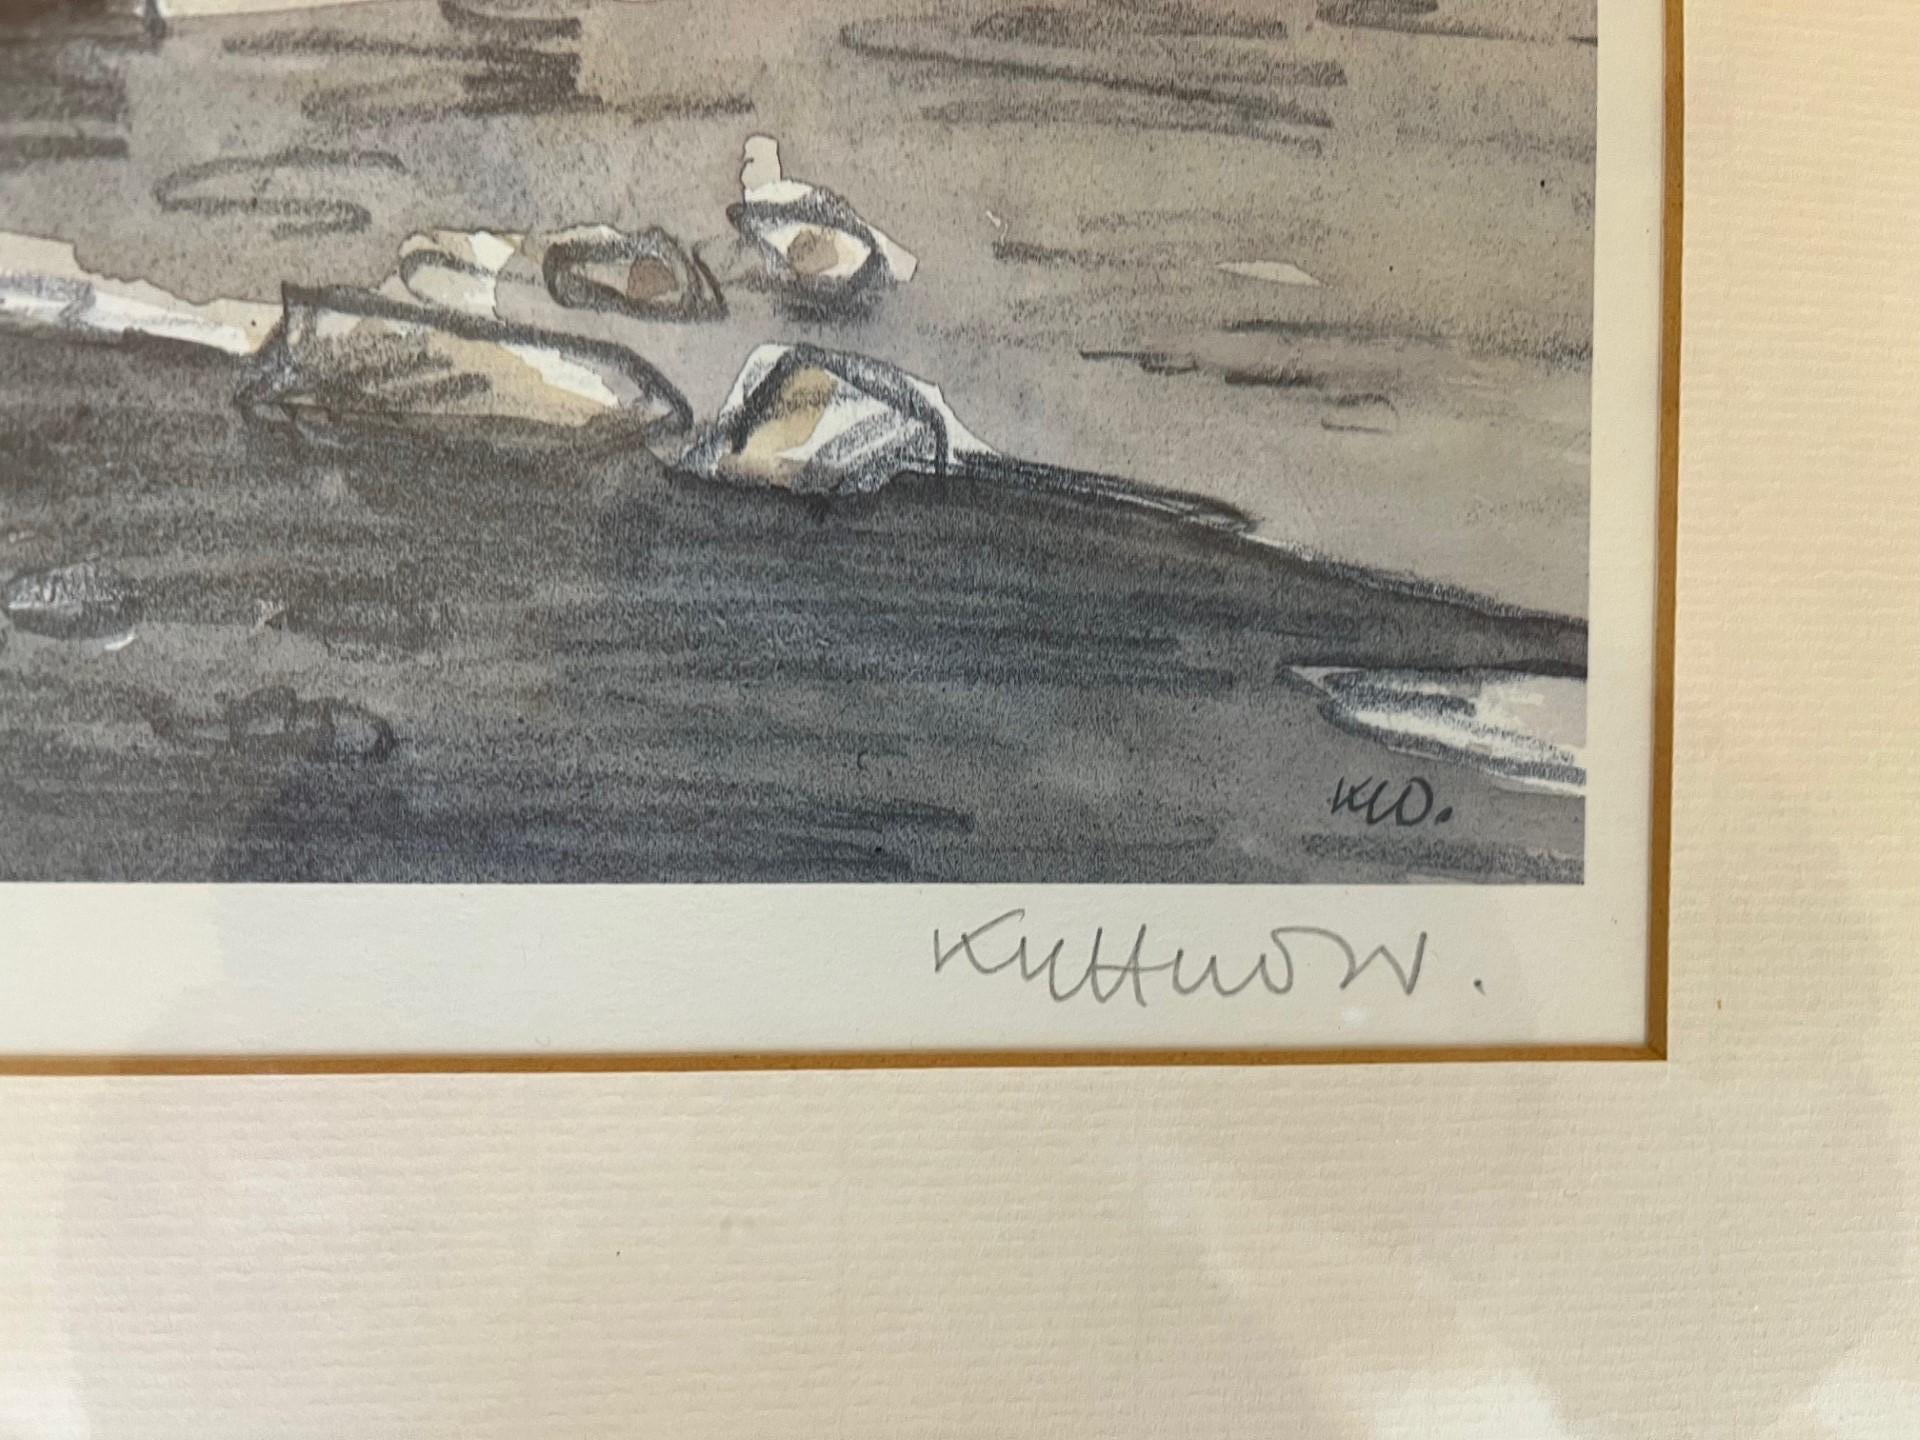 Artists Proof from the Limited Edition Lithograph circa 1999 which numbered 150.
This rare print was produced by Sir kyffin Williams, the supremely popular Welsh Painter,  with all proceeds going to the Church Fund.
Typical of his work, it has space